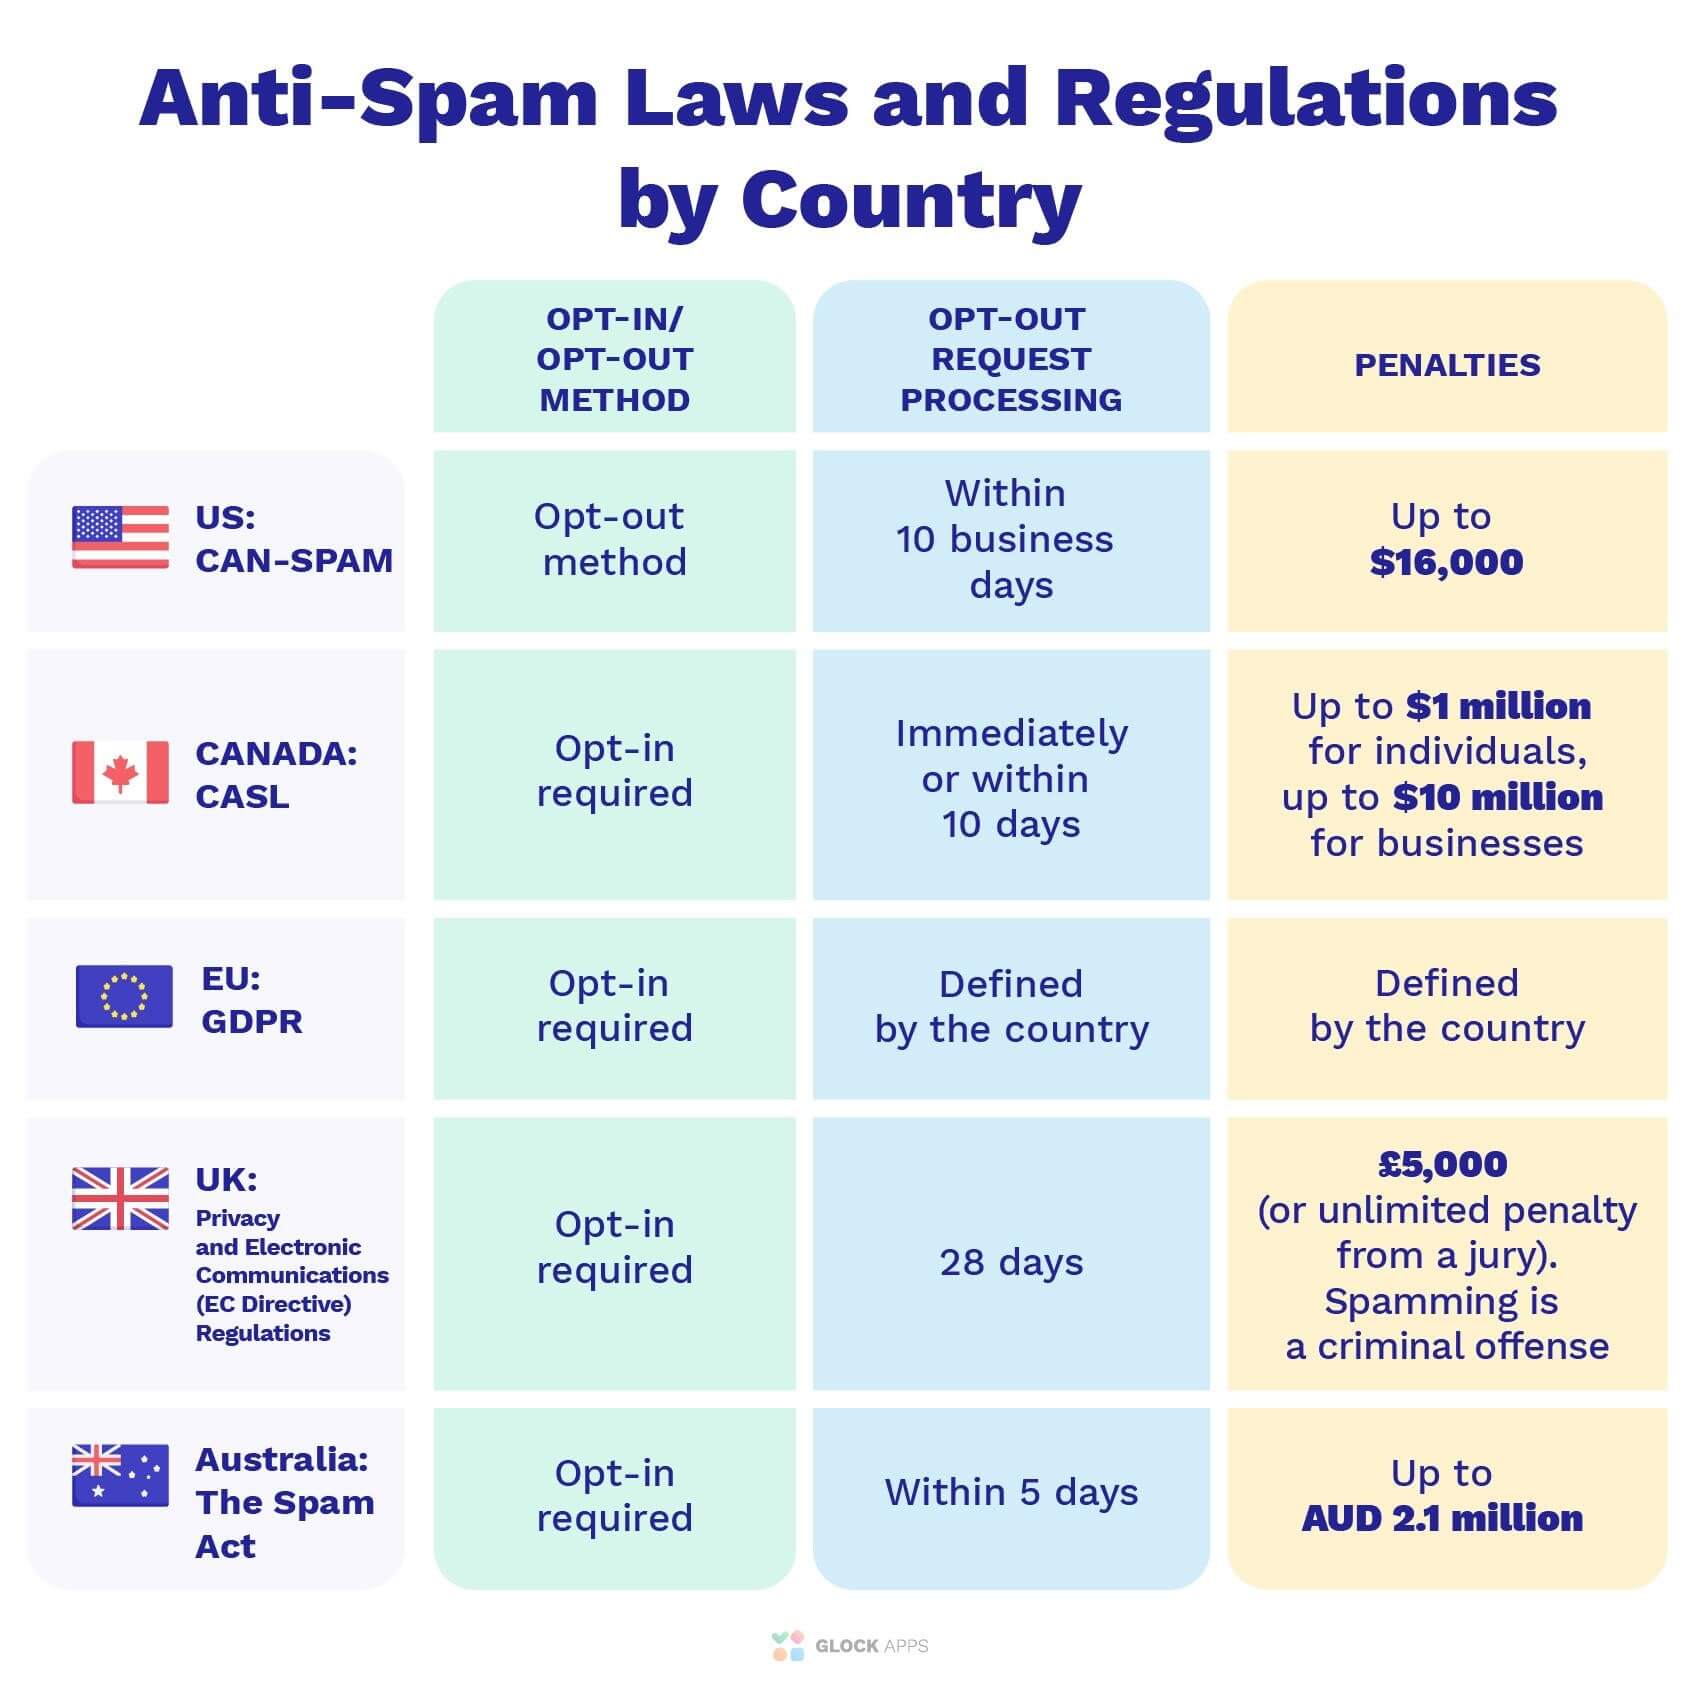 Comparison of anti-spam laws and regulations by country